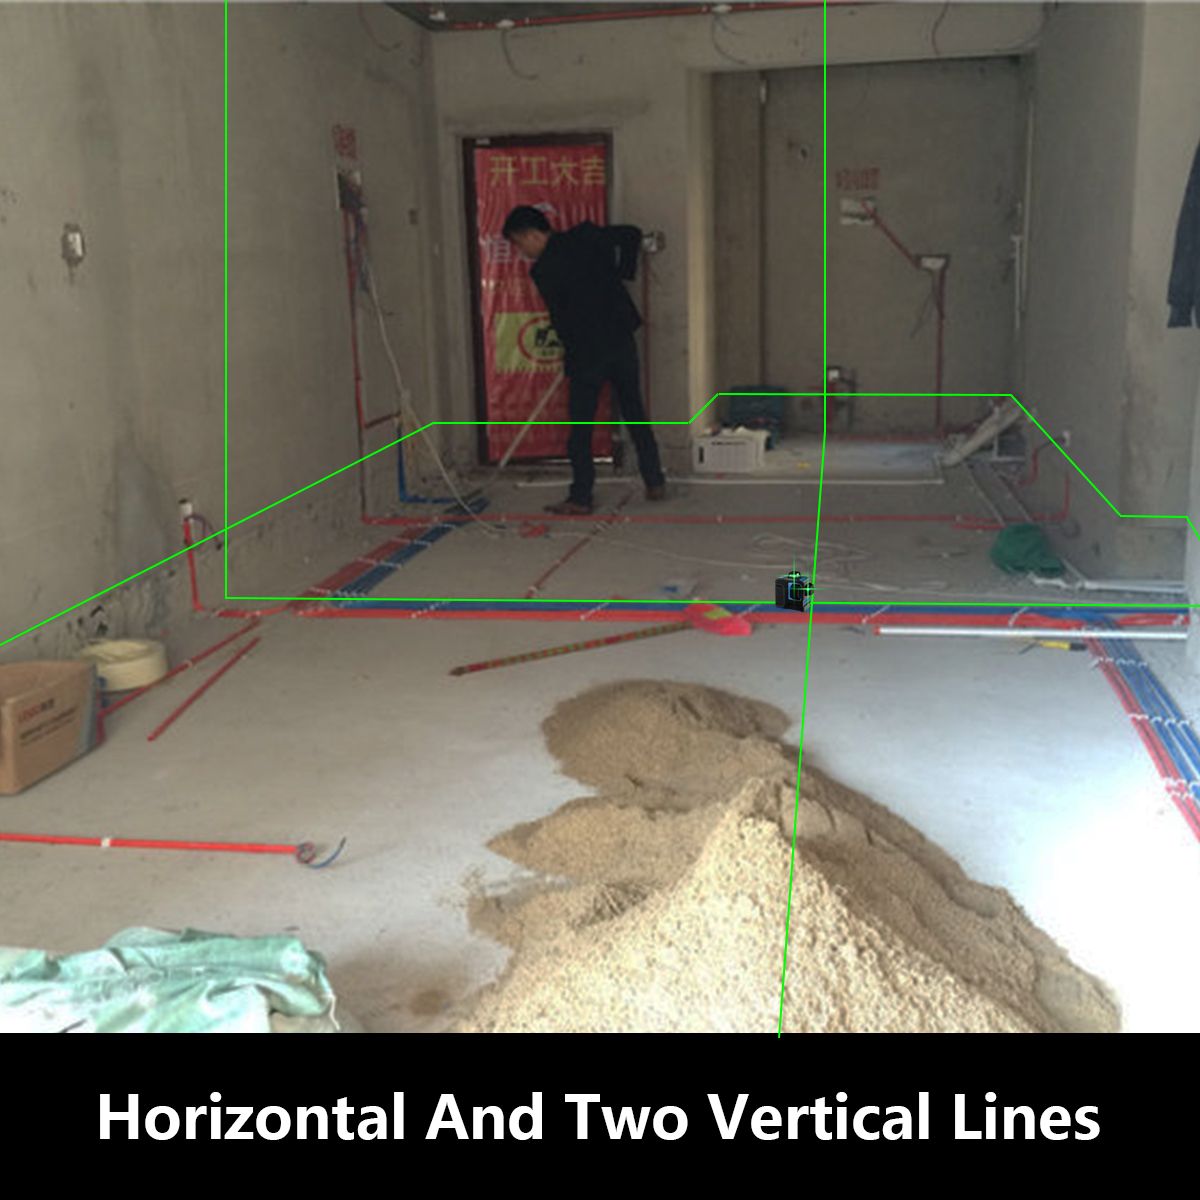 12-Lines-3D-Green-Beam-Self-Leveling-Laser-Level-3x360-Cross-Line--Three-Plane-Leveling-and-Alignmen-1488109